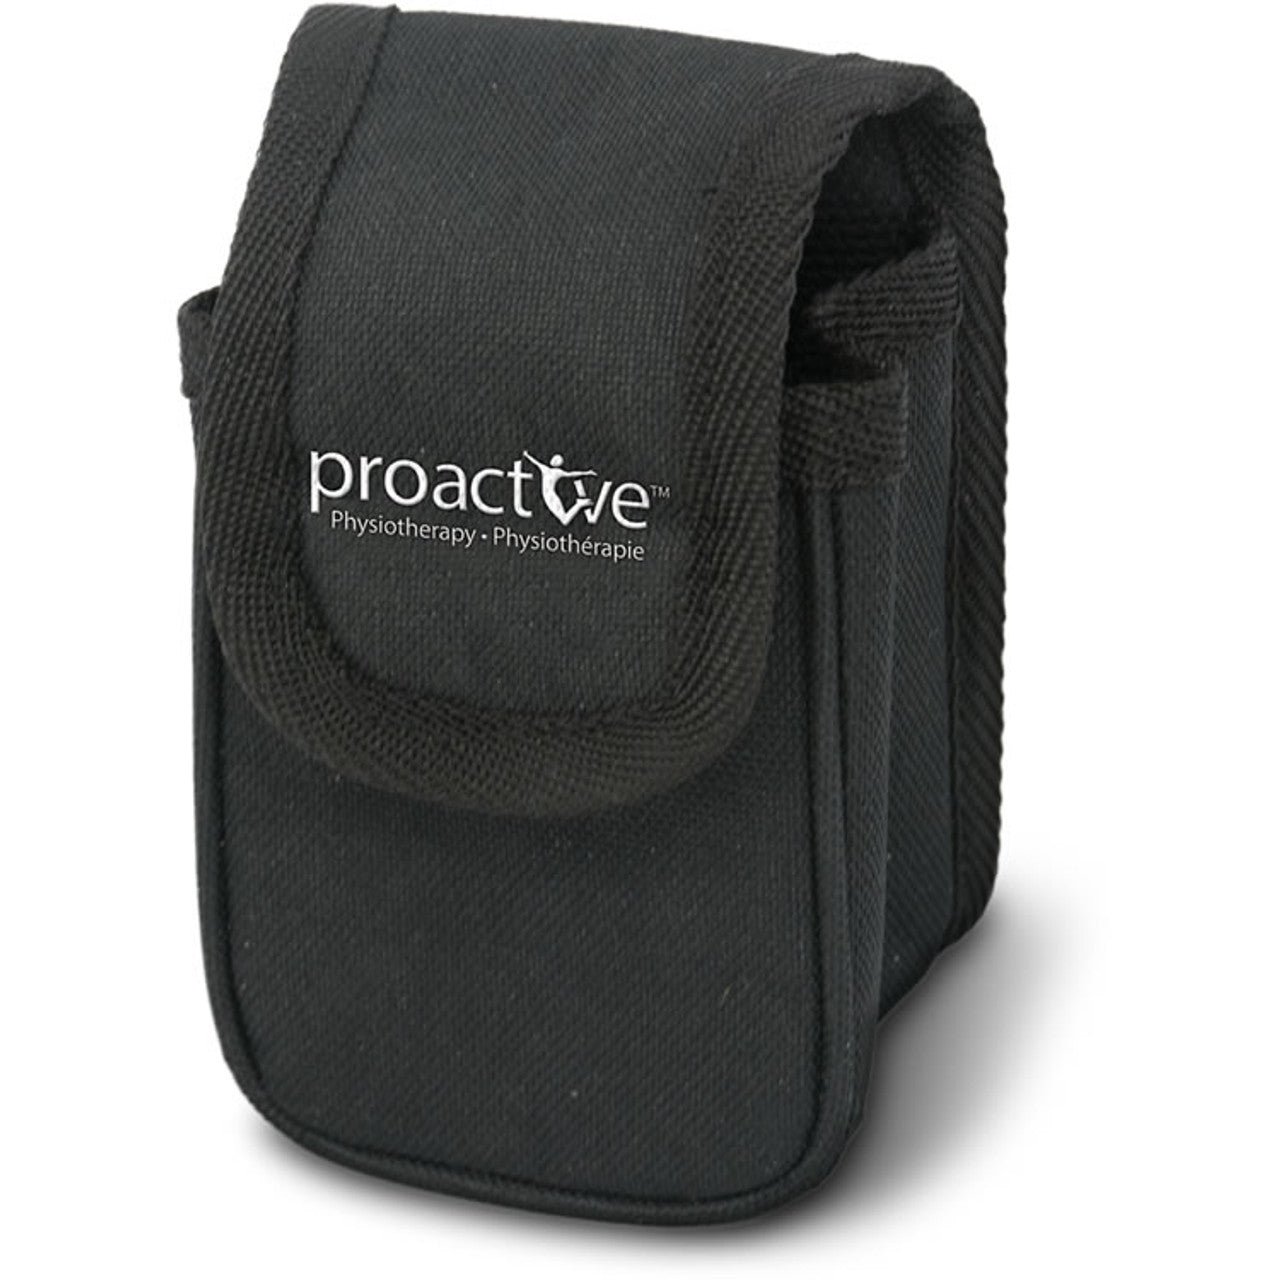 ProActive Thera3+ 3 in 1 TENS, EMS, Massage